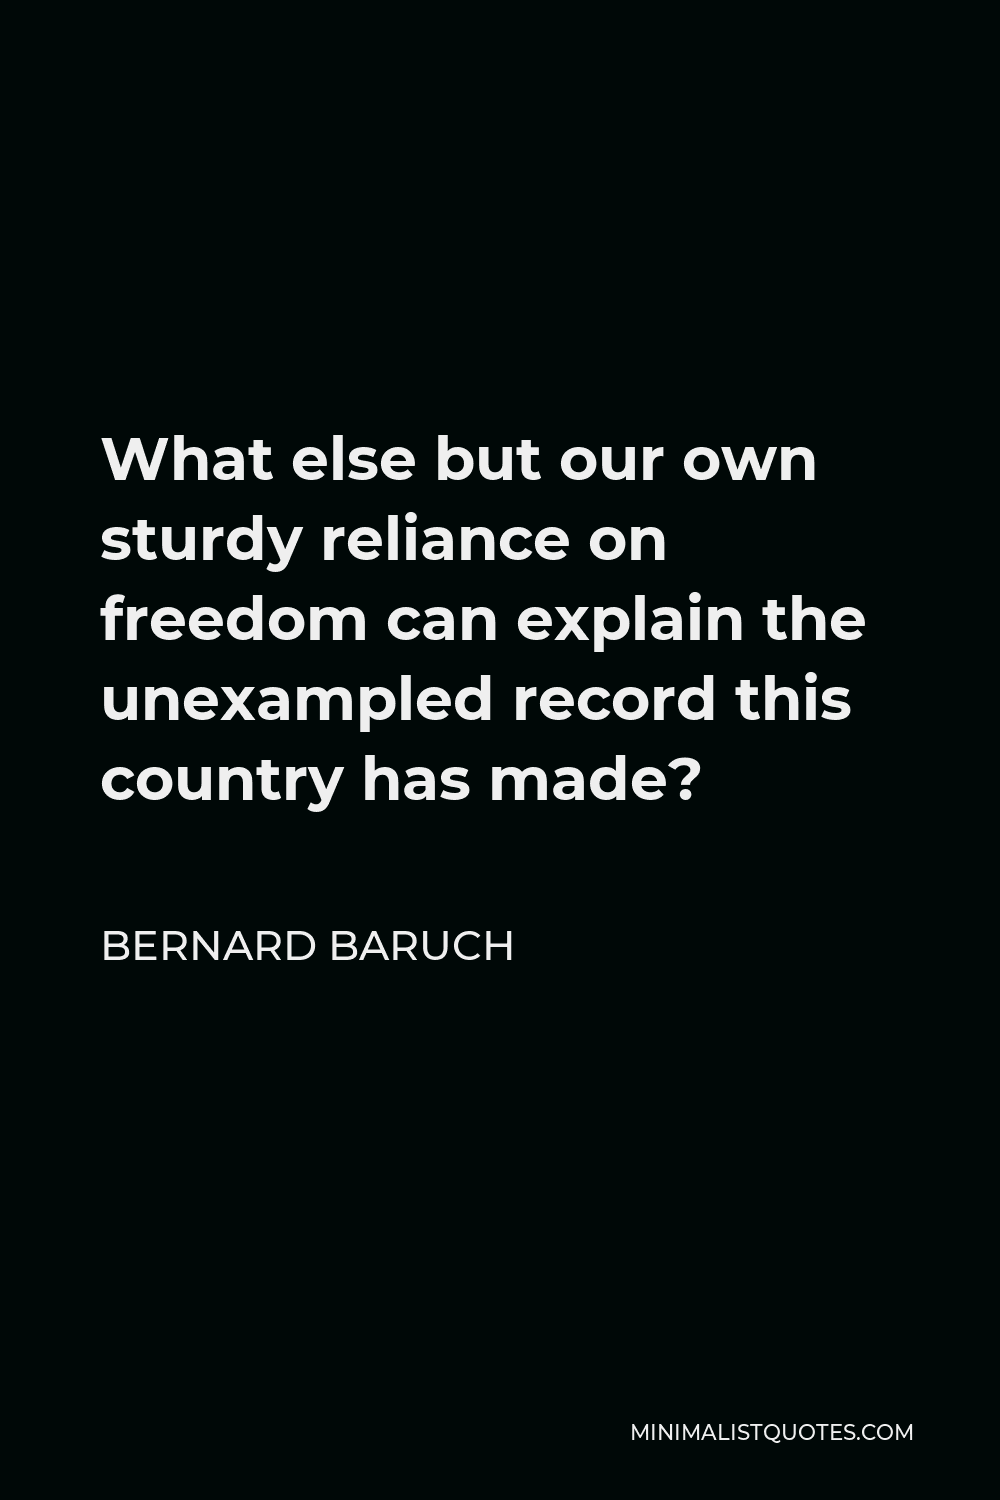 Bernard Baruch Quote - What else but our own sturdy reliance on freedom can explain the unexampled record this country has made?